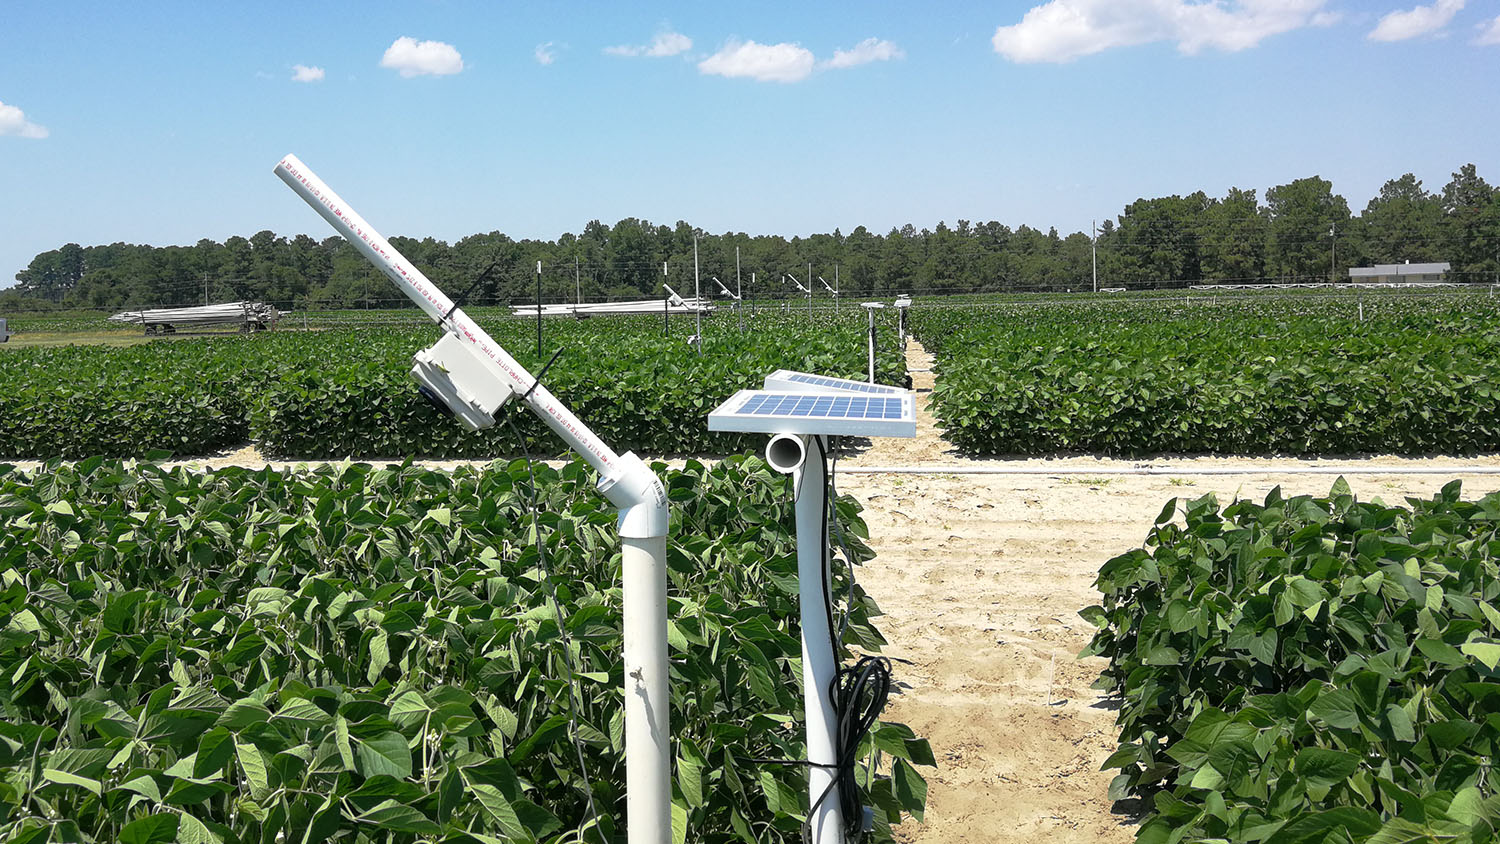 Low-Cost Cameras Could Be Sensors to Remotely Monitor Crop Stress